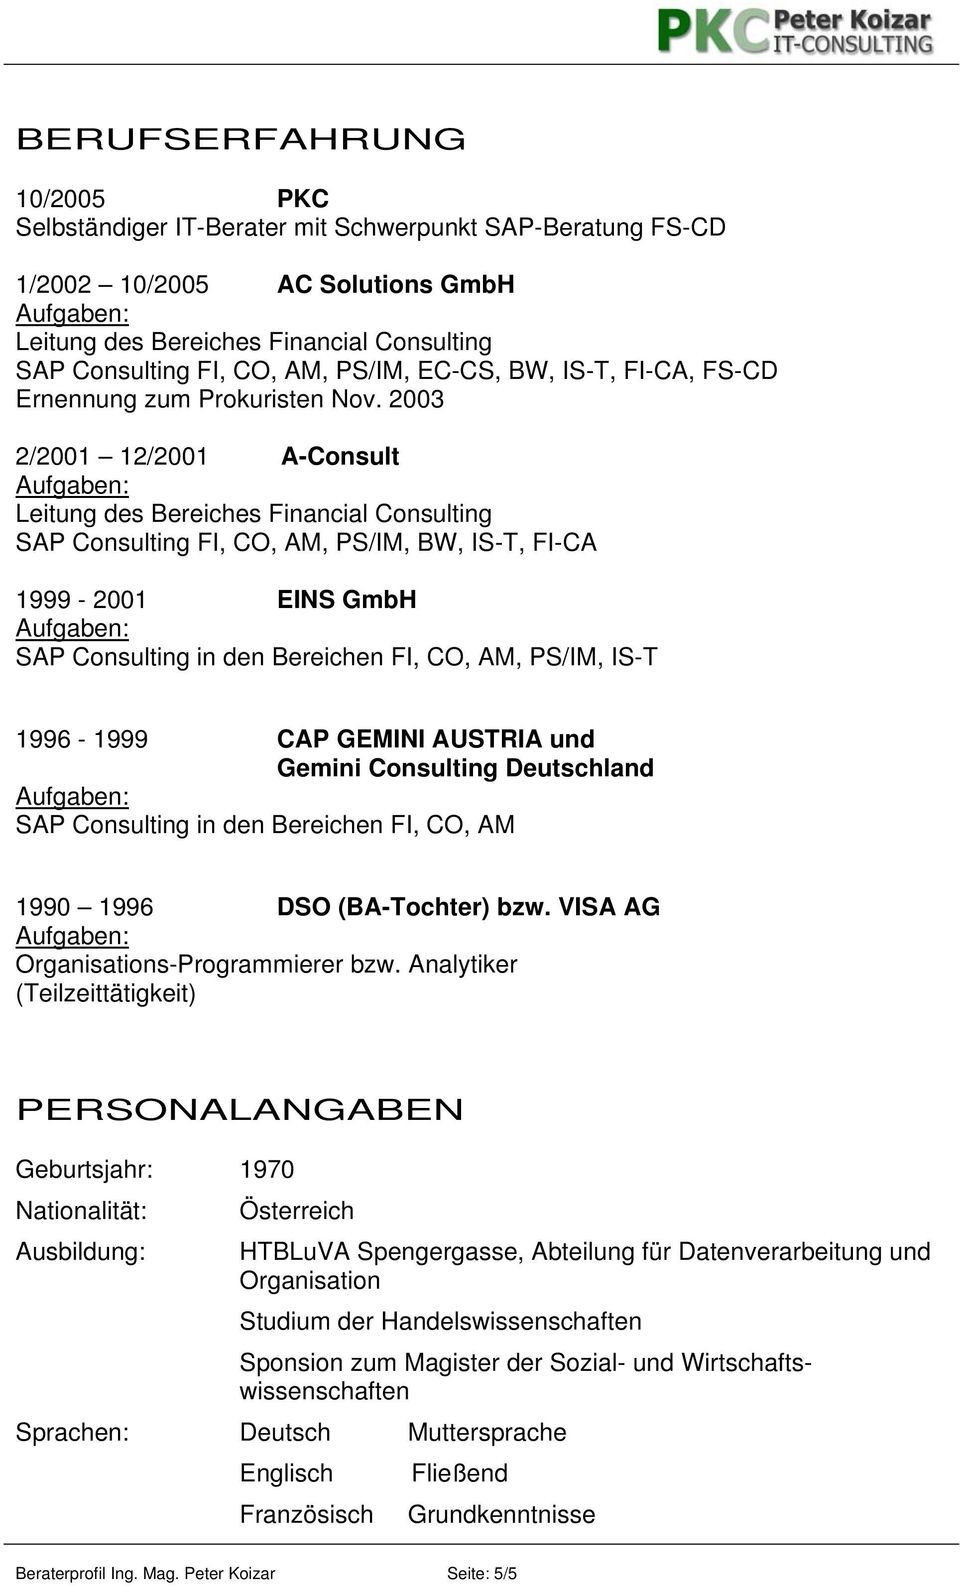 2003 2/2001 12/2001 A-Consult Leitung des Bereiches Financial Consulting SAP Consulting FI, CO, AM, PS/IM, BW, IS-T, FI-CA 1999-2001 EINS GmbH SAP Consulting in den Bereichen FI, CO, AM, PS/IM, IS-T